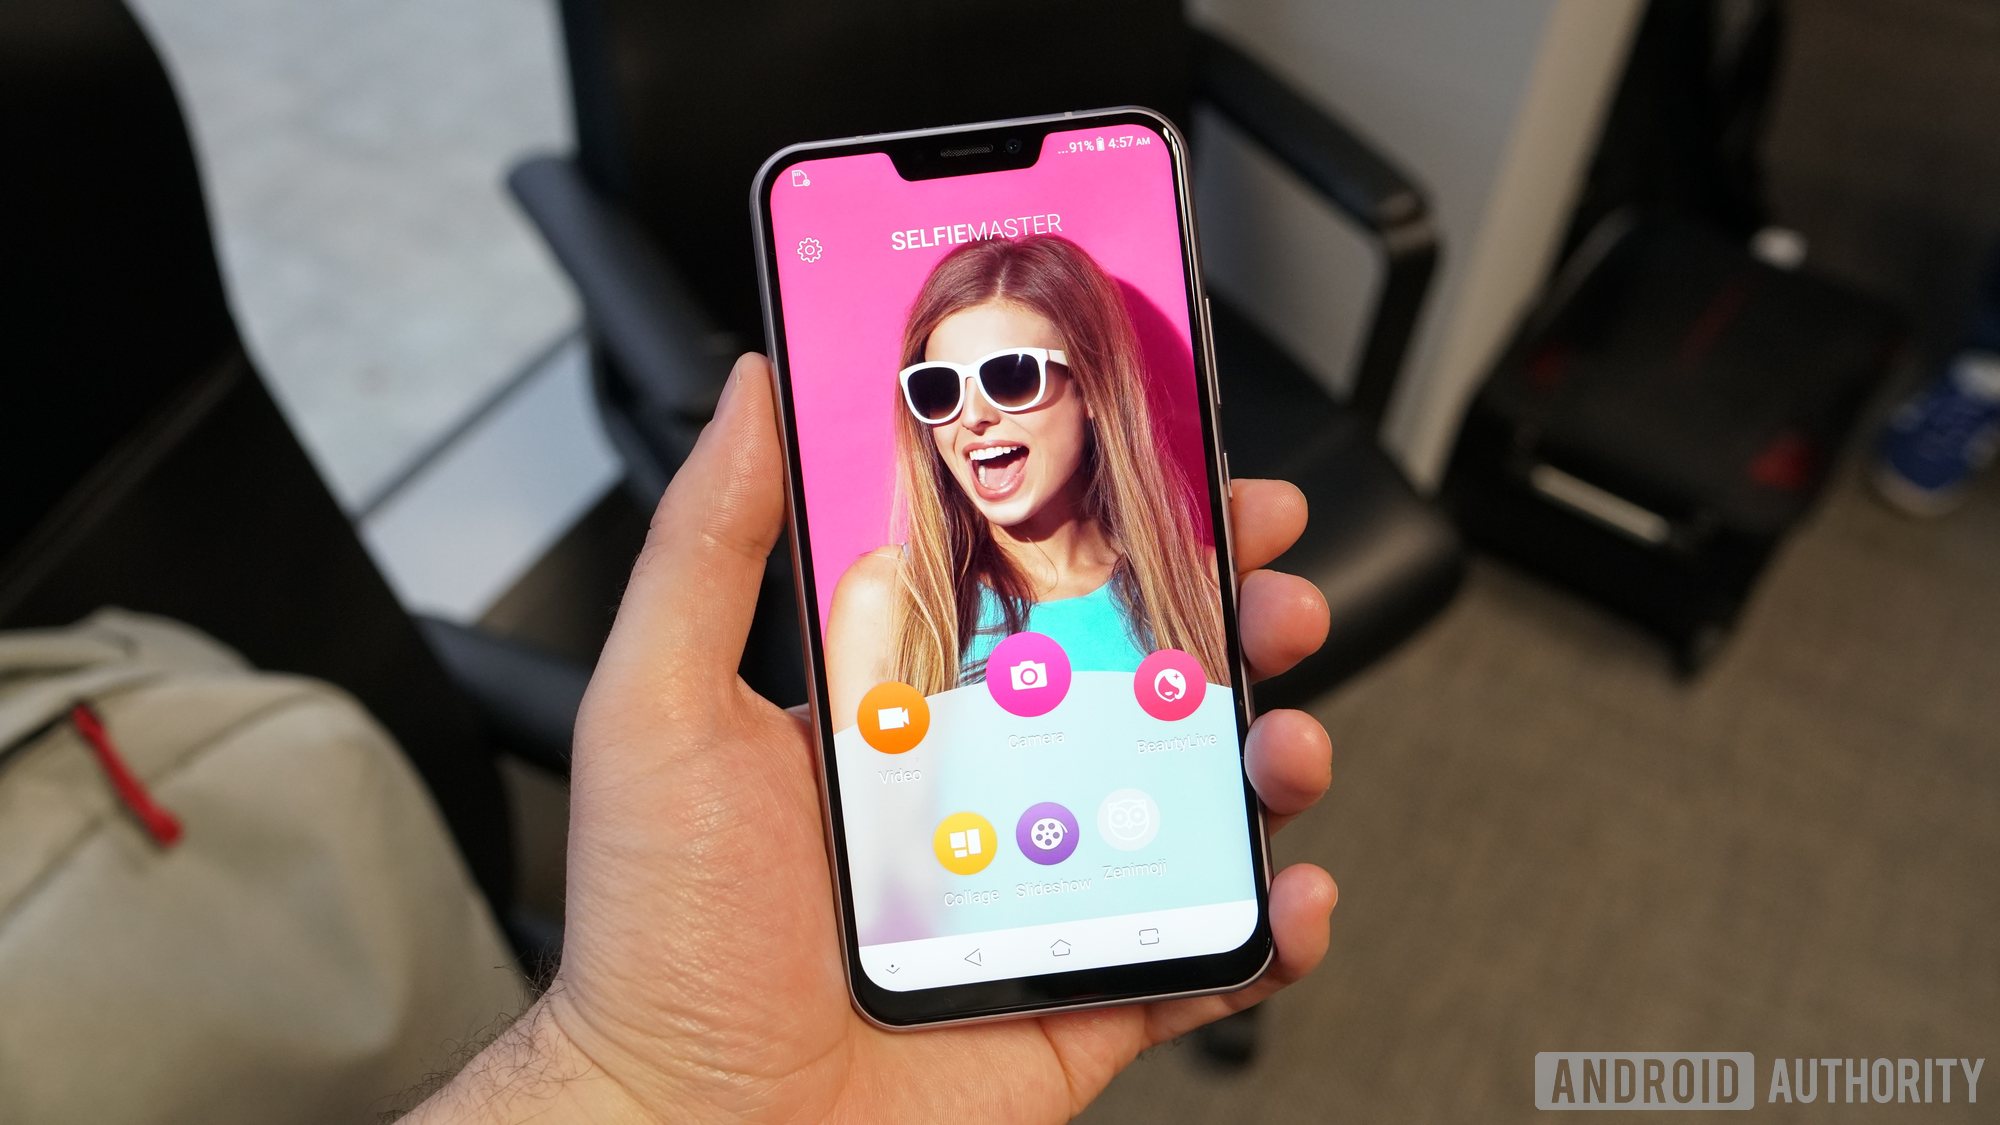 Asus ZenFone 5: Specs and features - Android Authority